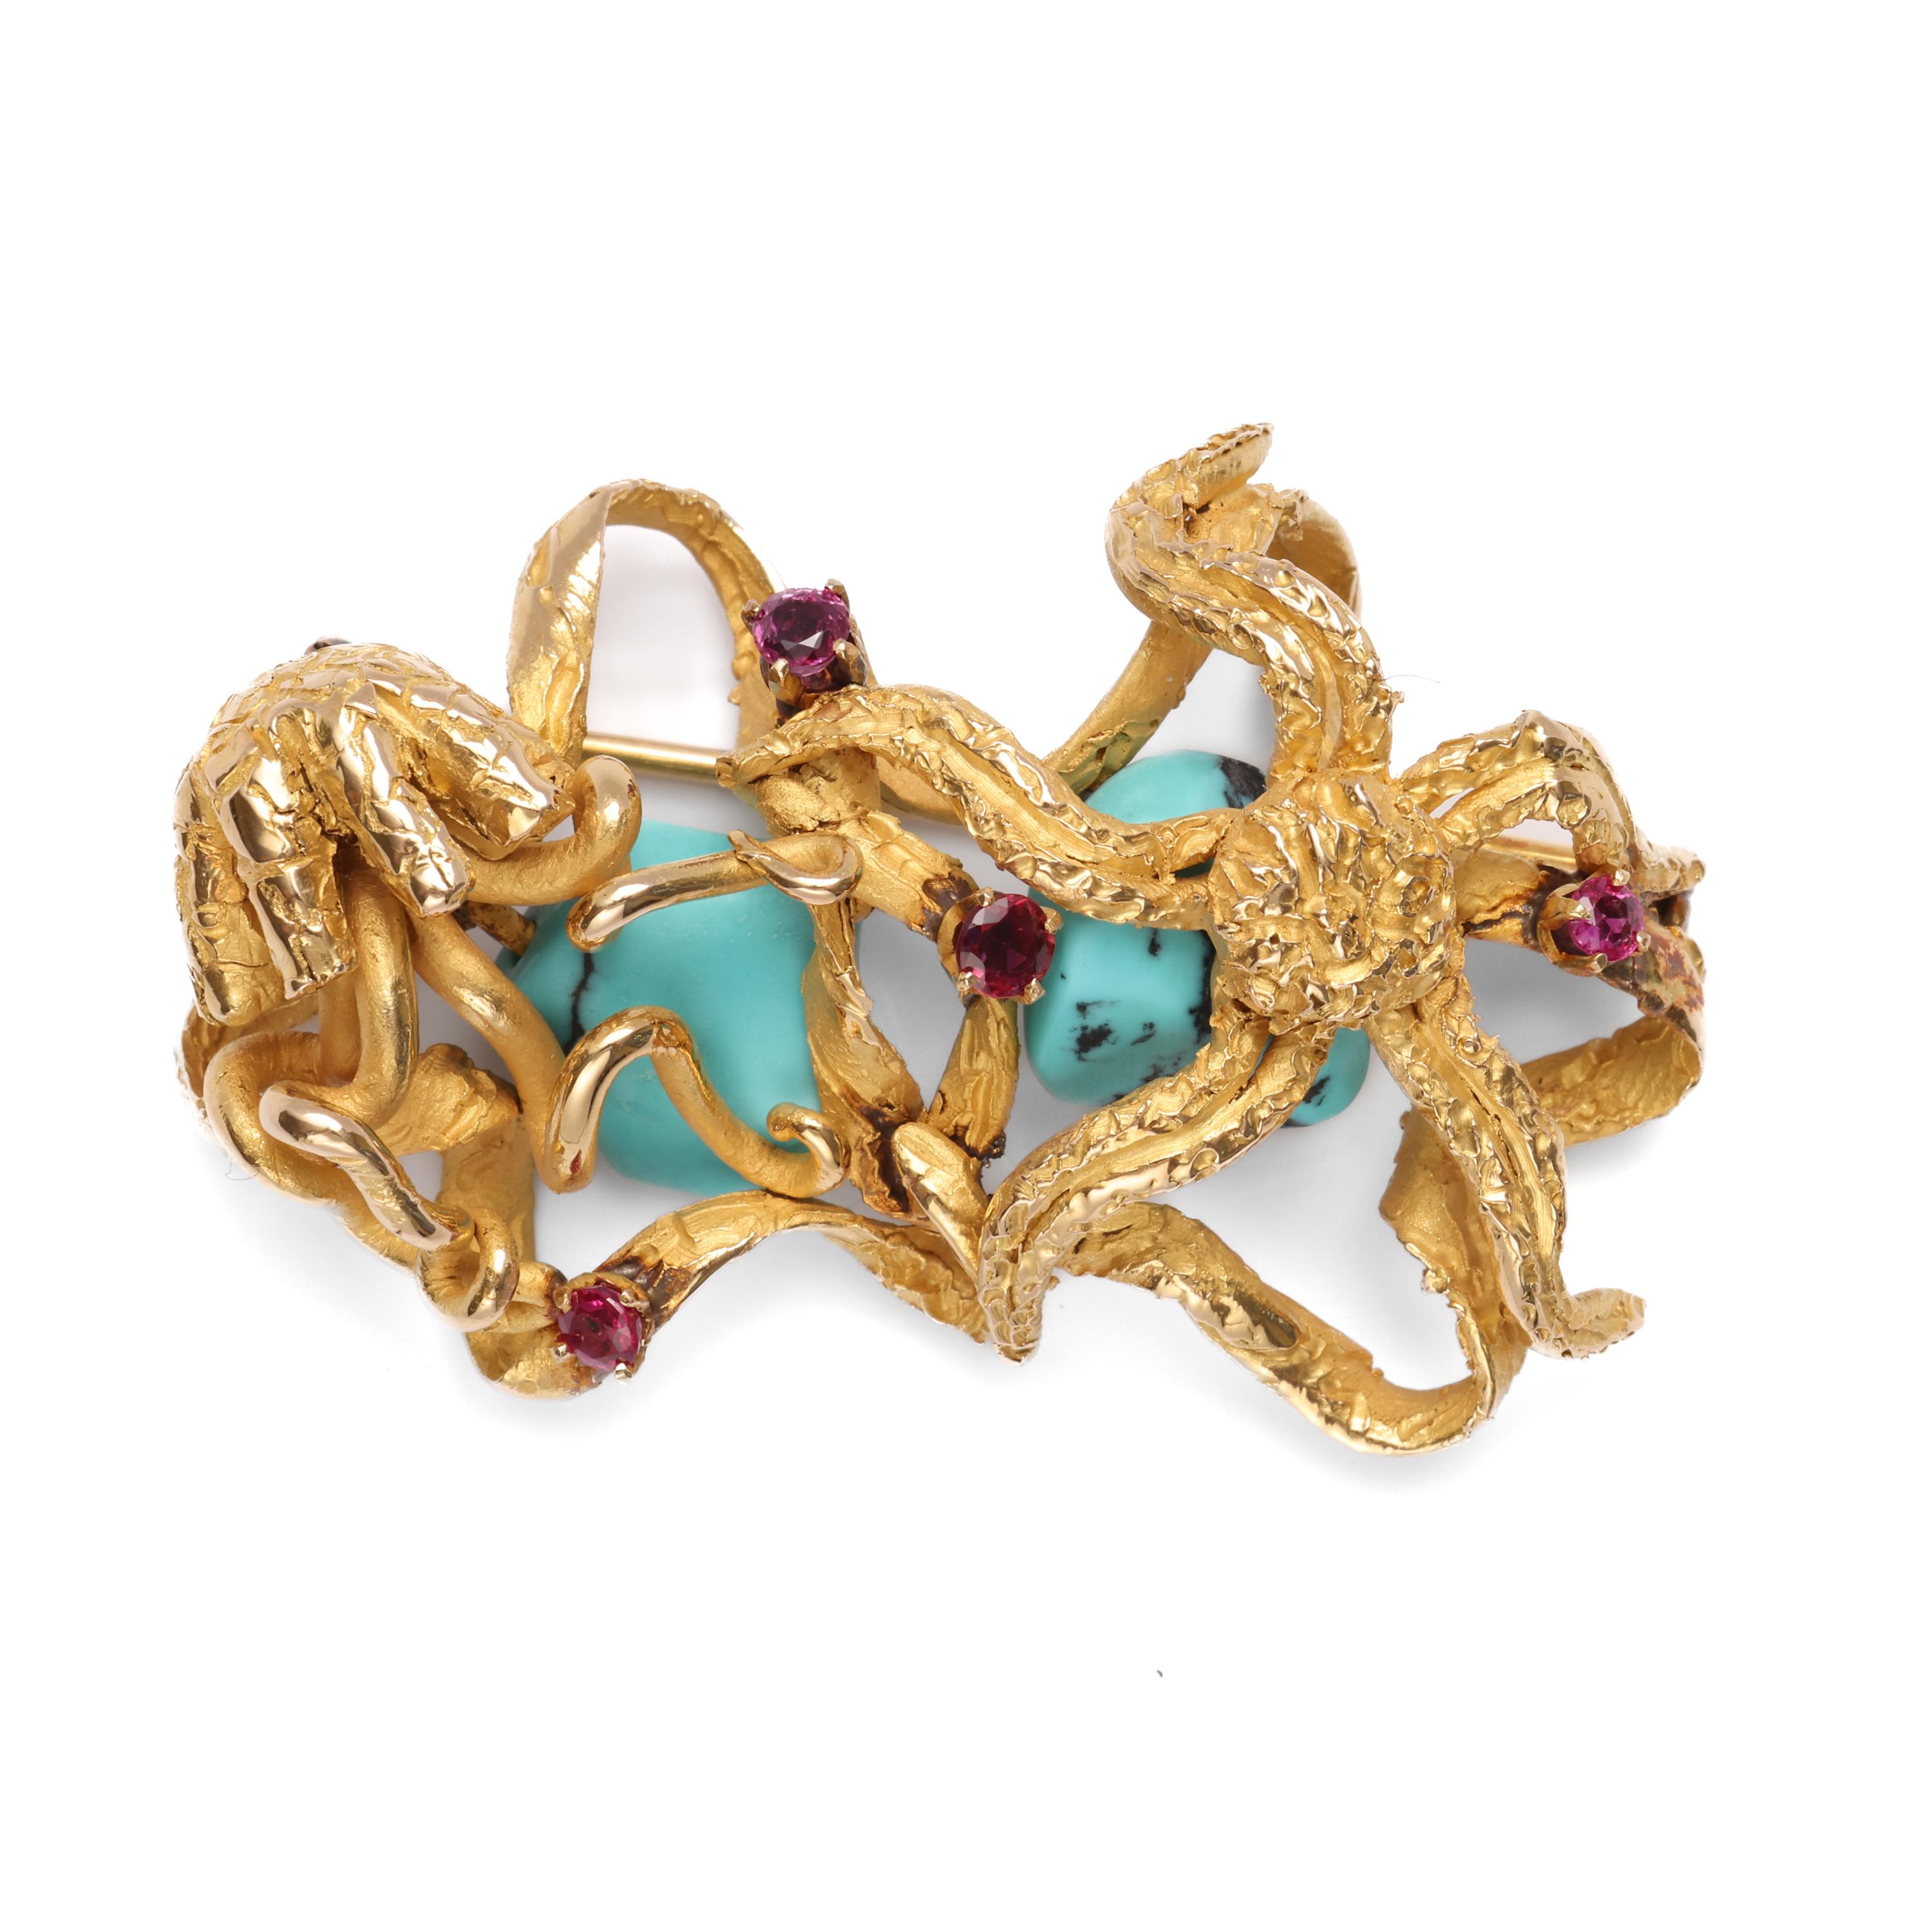 A jellyfish and a starfish appear engaged in battle over two gorgeous blue turquoise stones. High-quality natural rubies cling to the pair. This brooch came to me from an estate of pristine jewels from Argentina. Like the other pieces, there appears